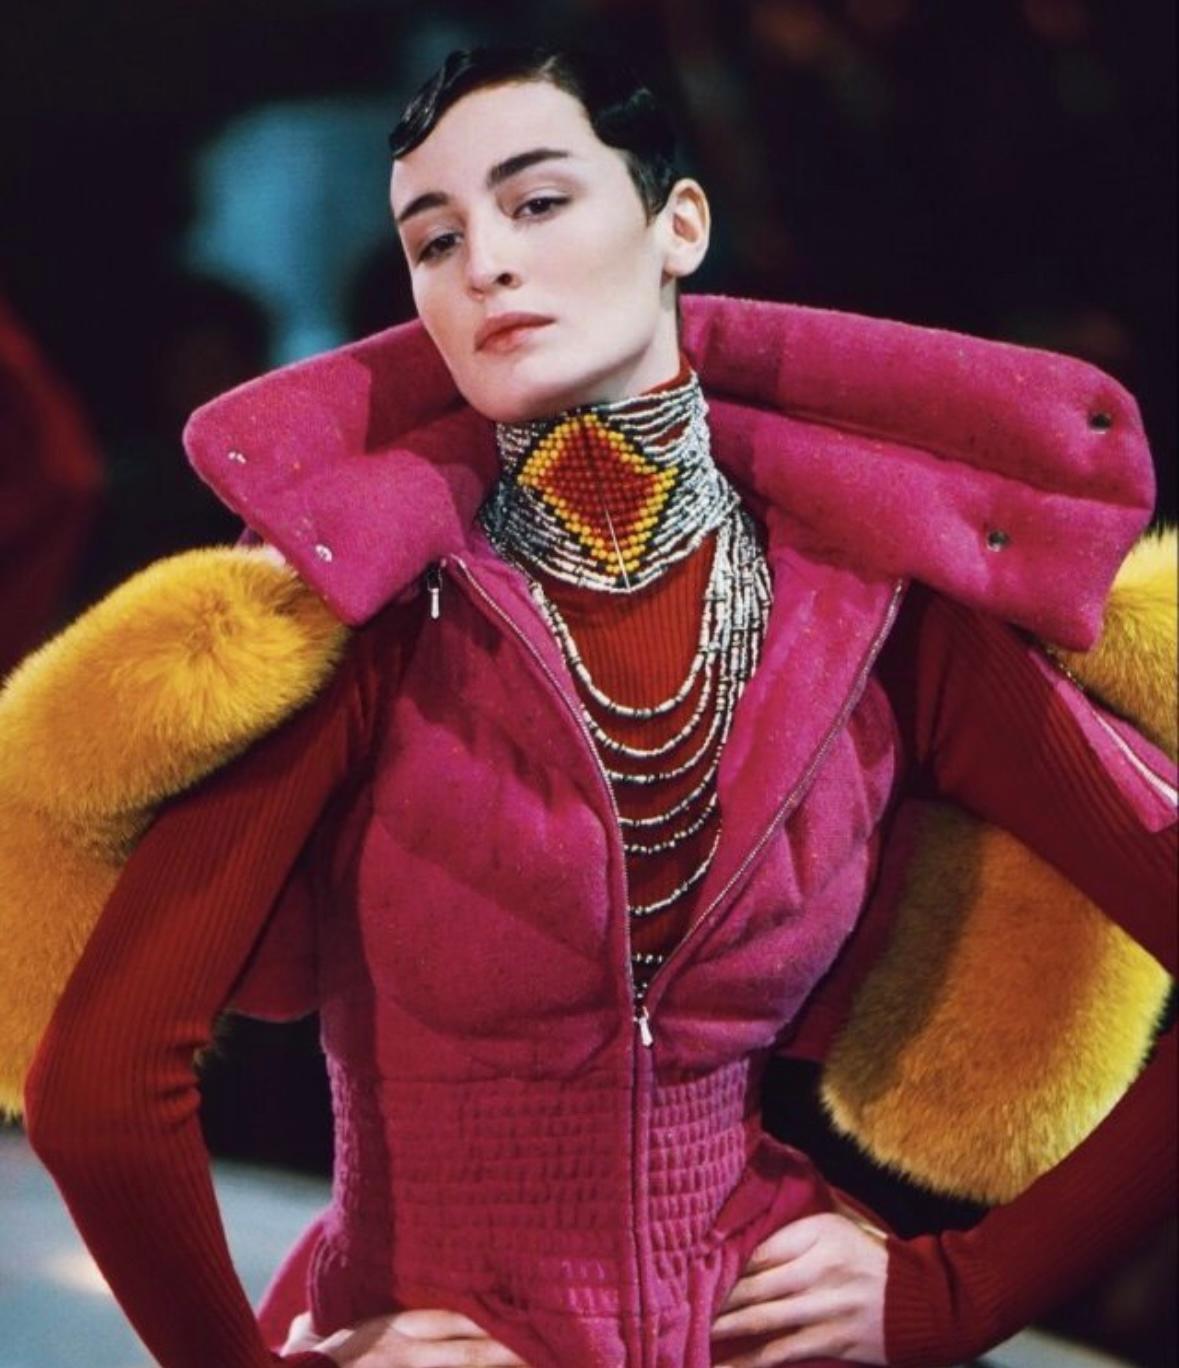 Presenting a beautiful beaded Christian Dior Masai choker, designed by John Galliano. From the Fall/Winter 1998 collection, this amazing choker features a red and yellow diamond pattern and is made complete with a gunmetal hook closure. This pattern